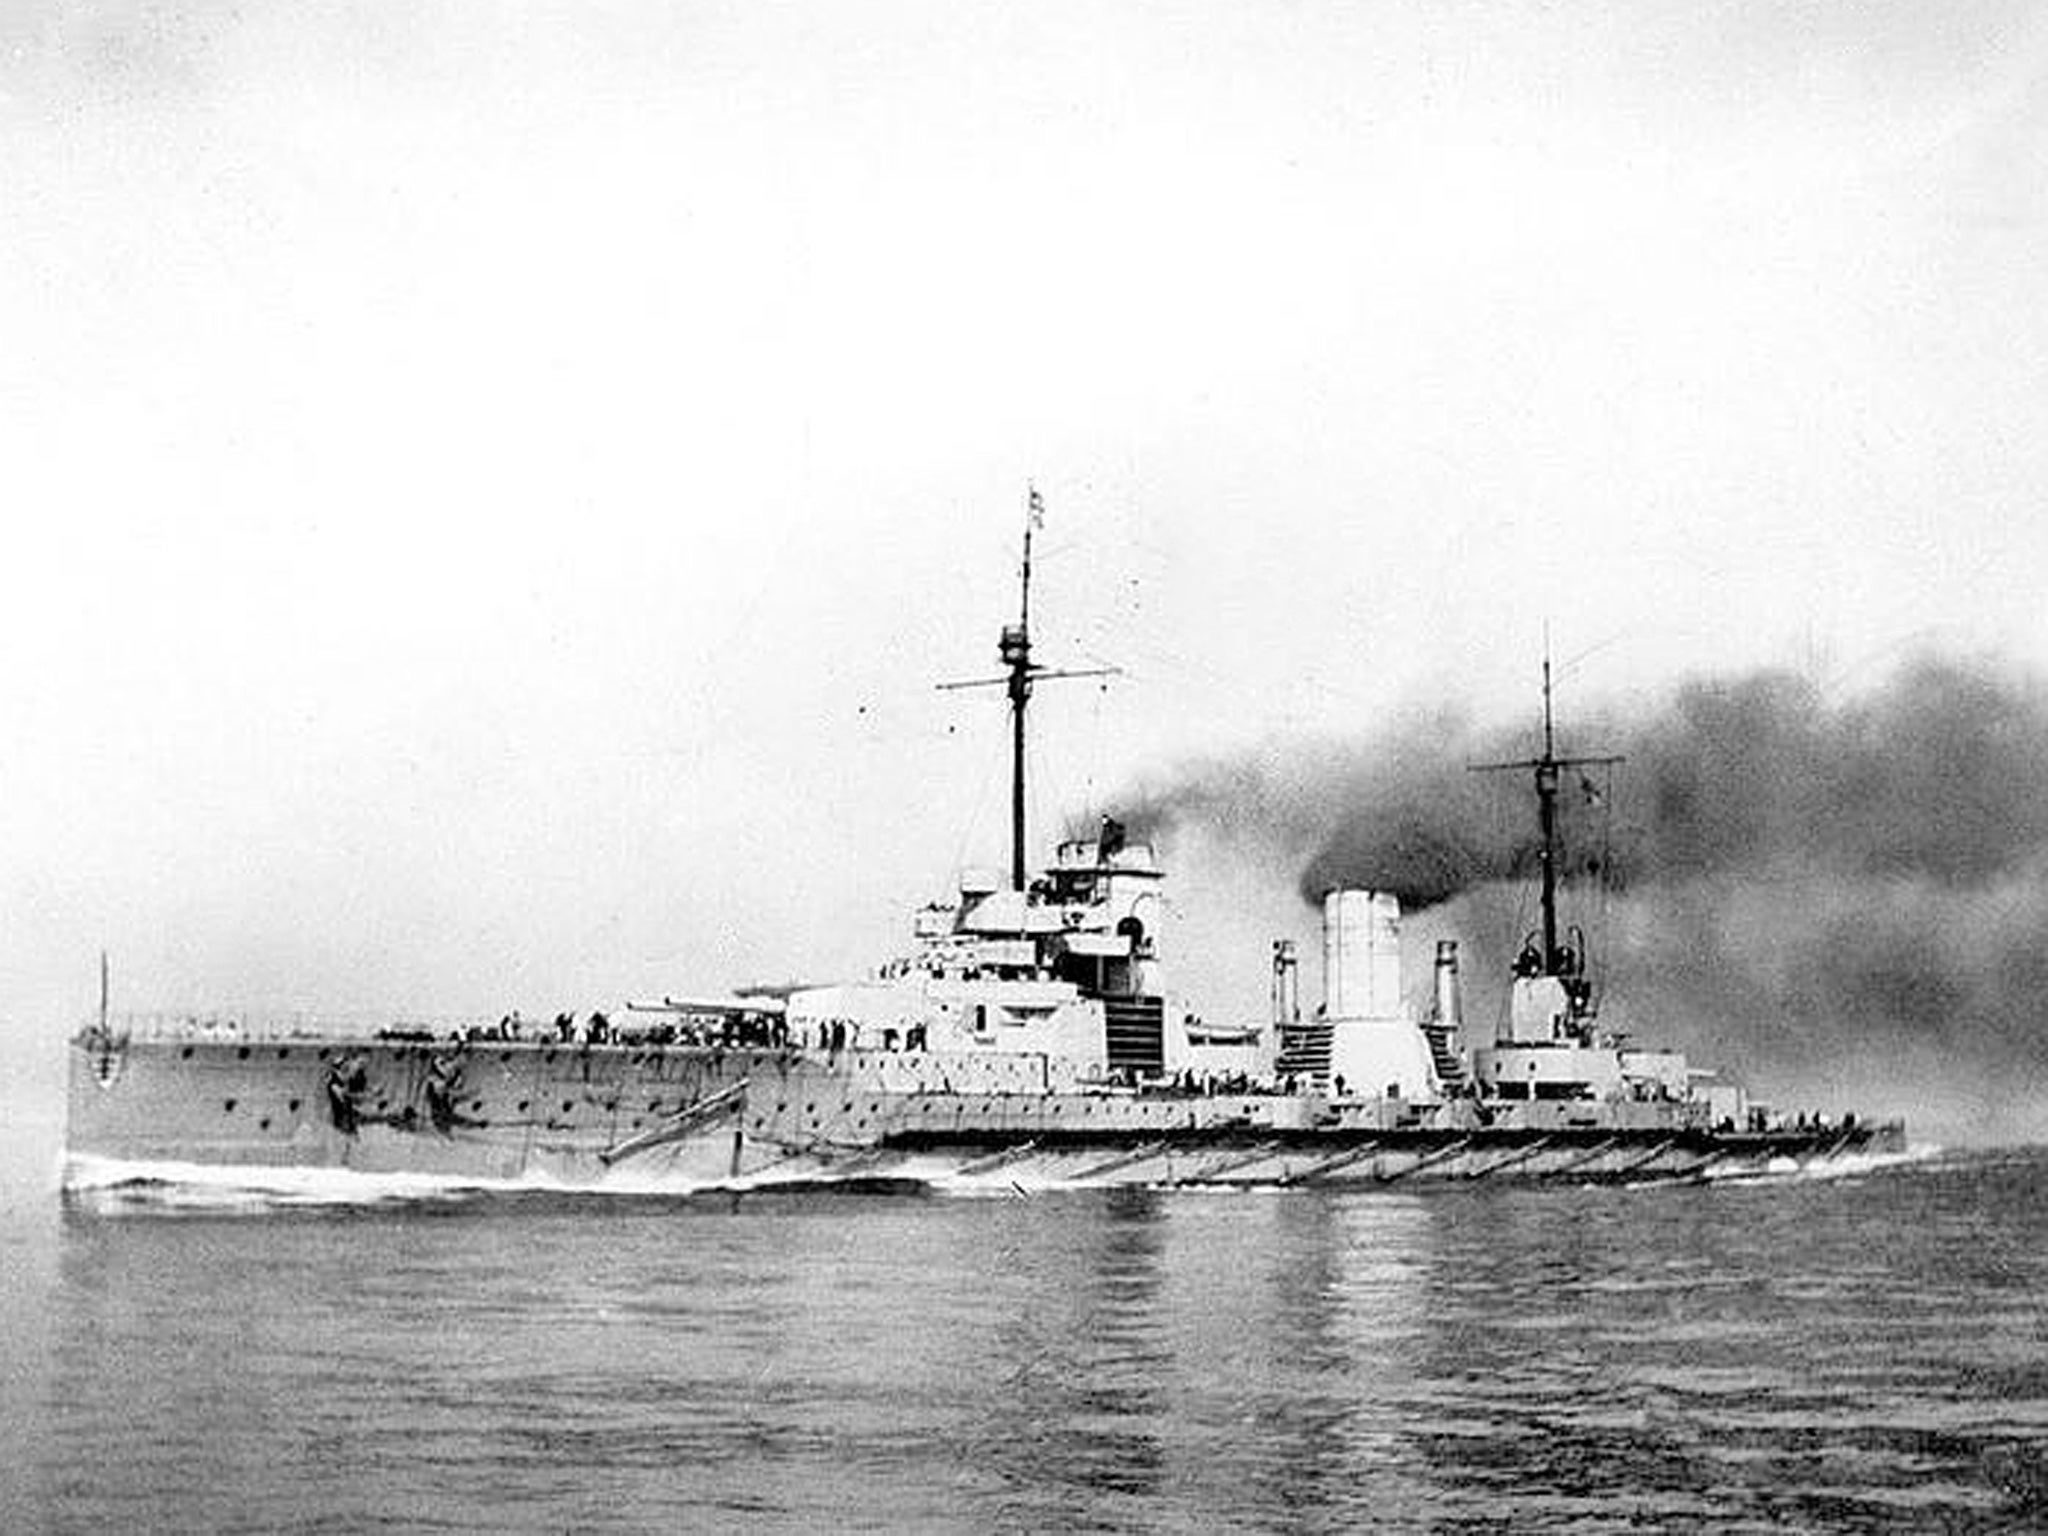 The SMS Seydlitz, which led the raid on Yarmouth in 1914